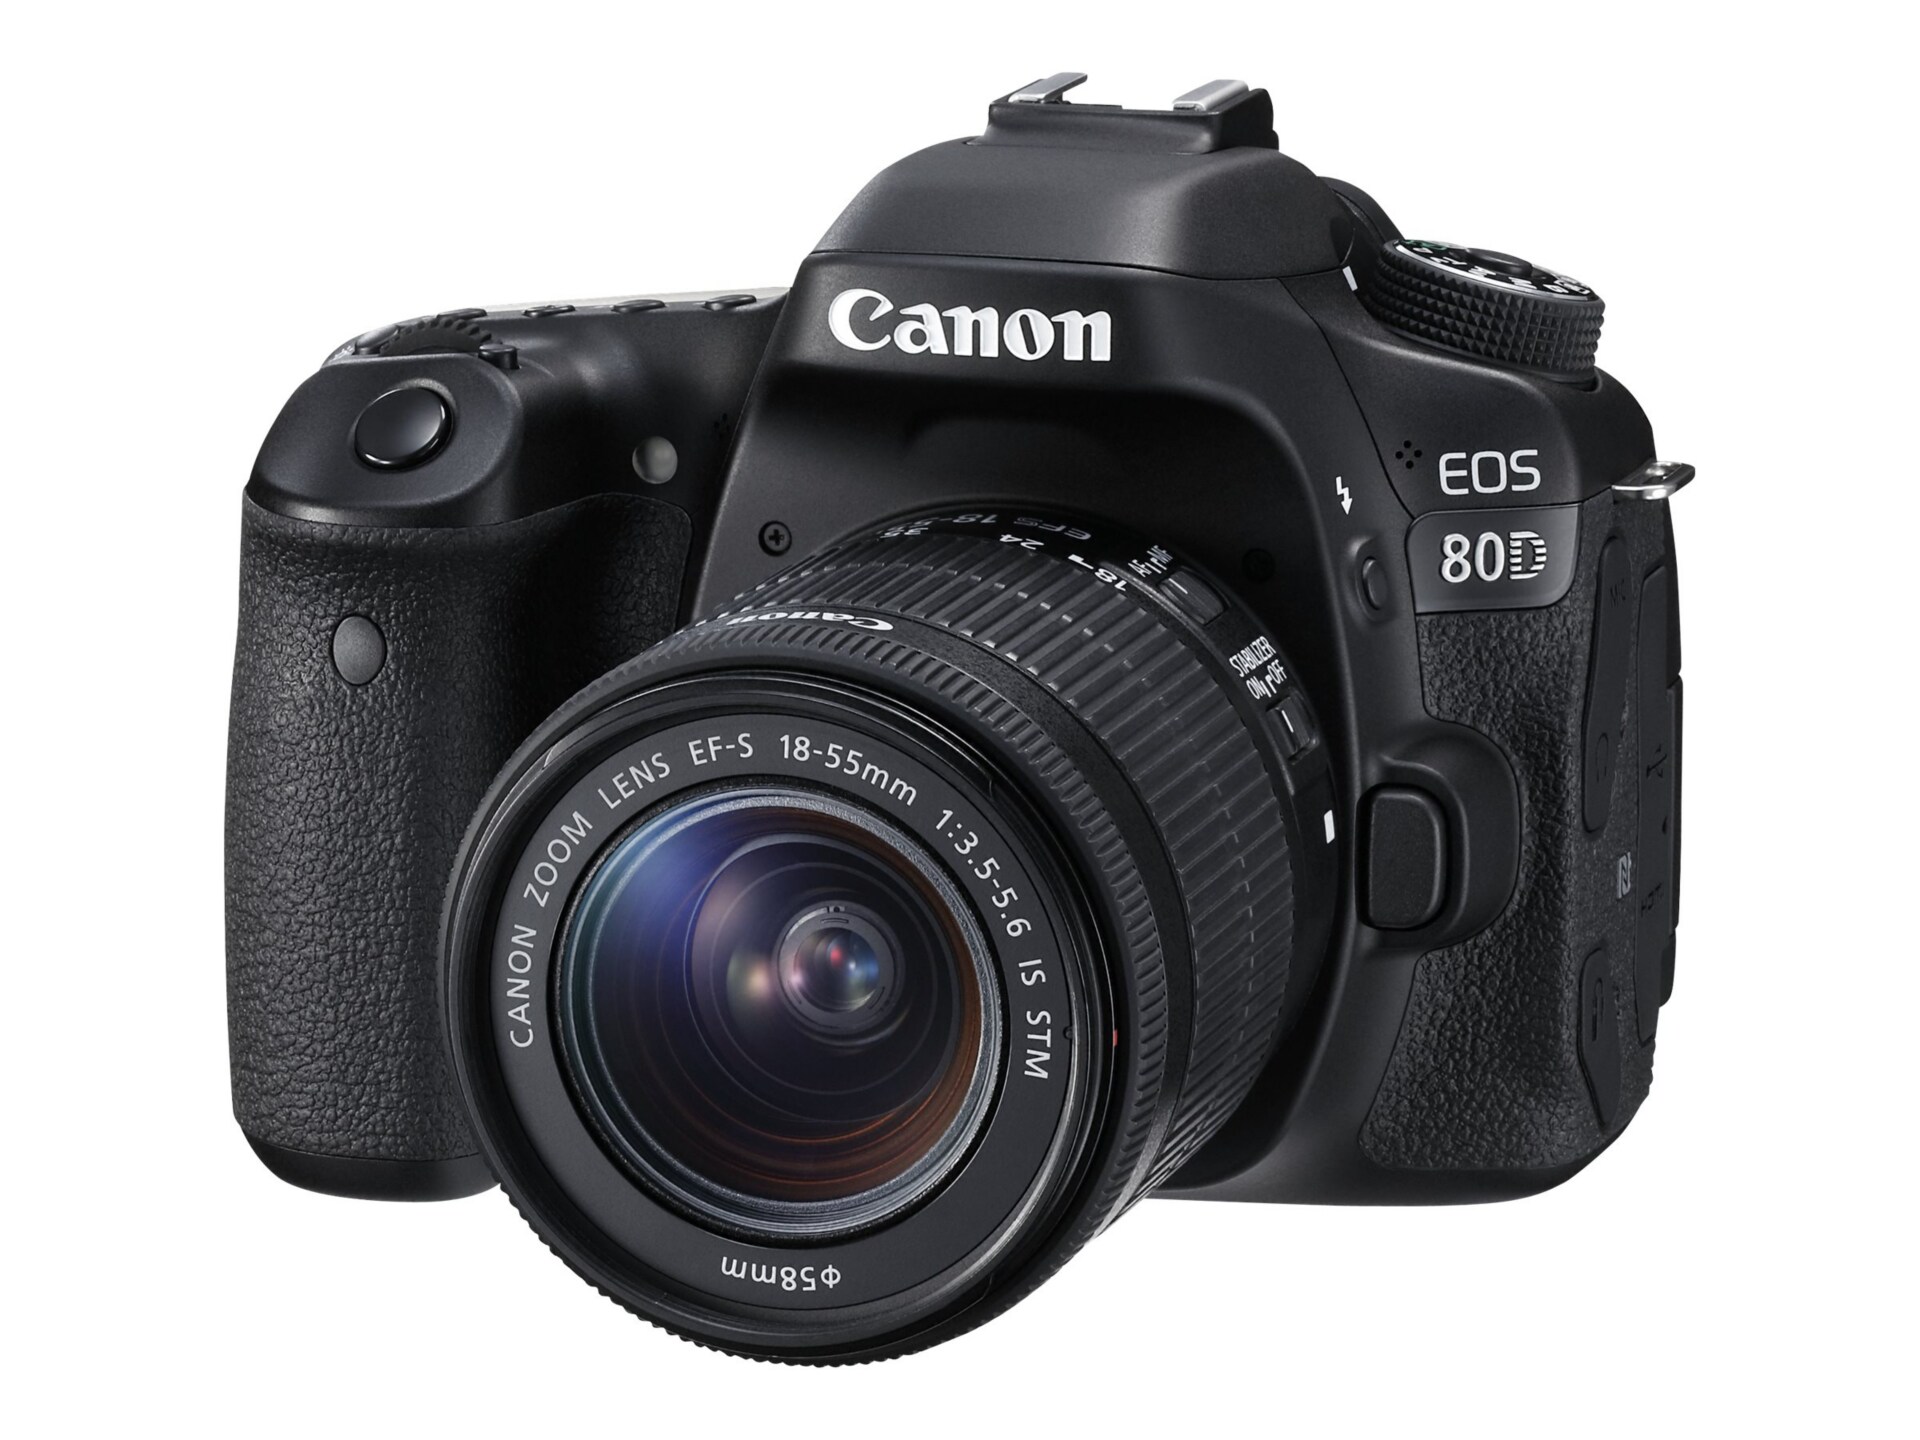 Canon EOS 80D - EF-S 18-55mm IS STM lens